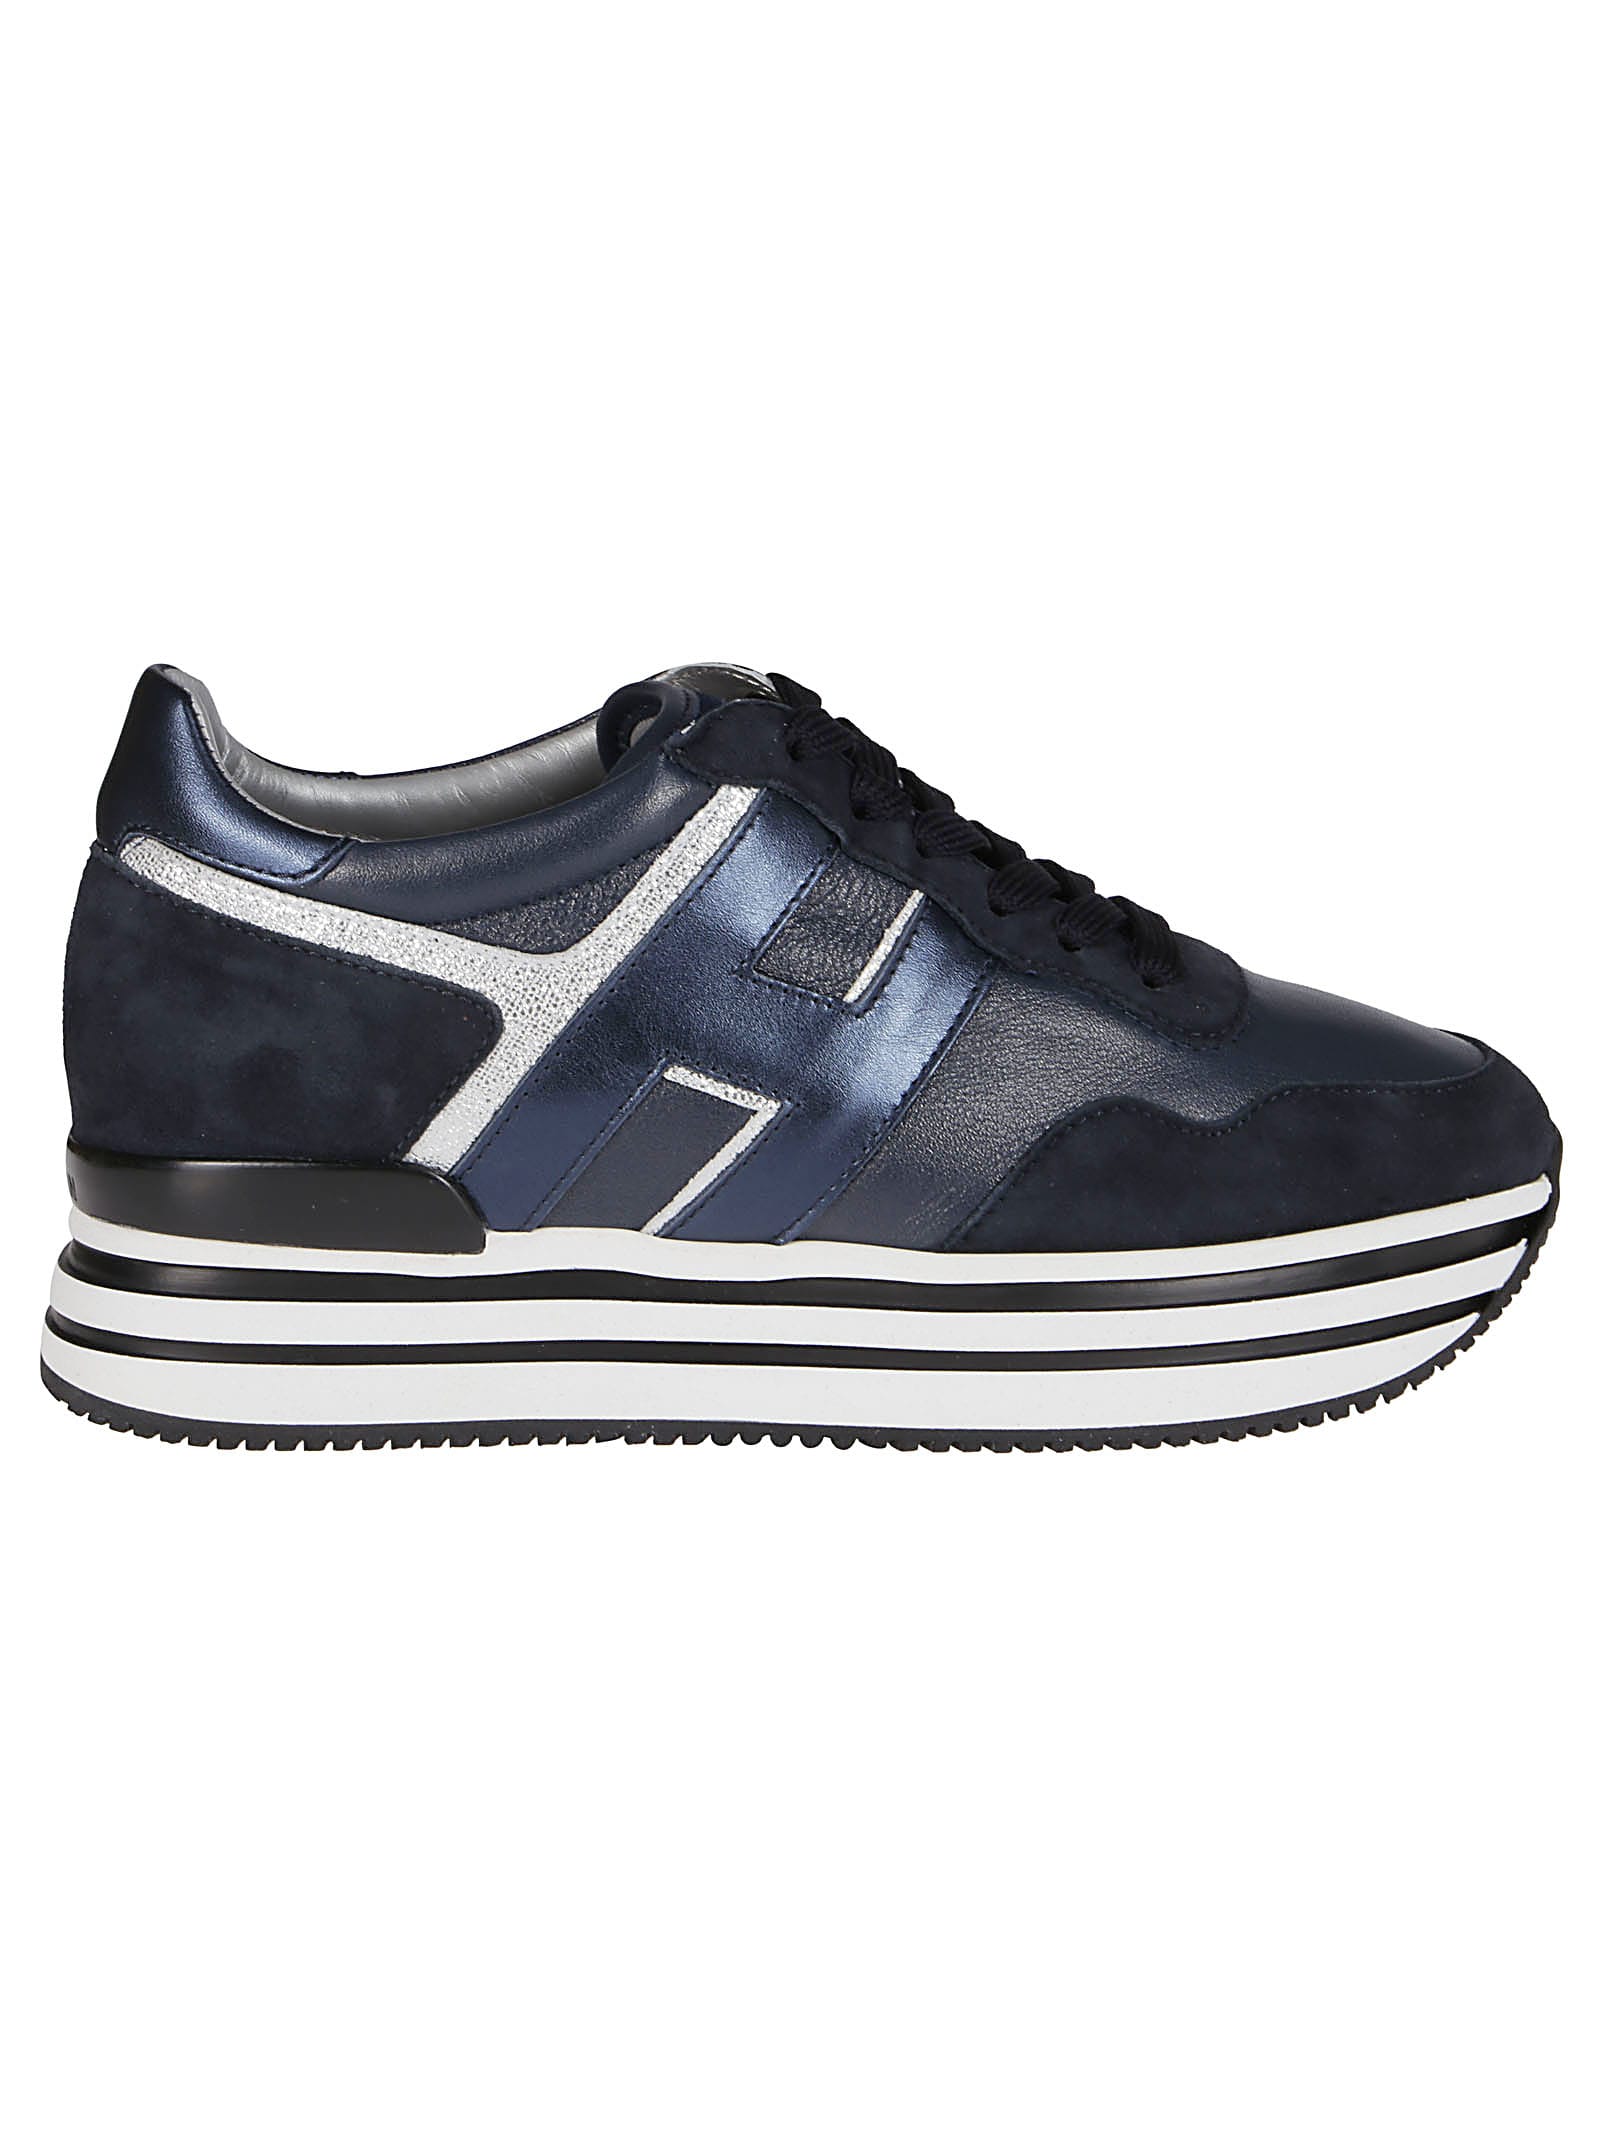 Hogan Blue Leather H222 Sneakers